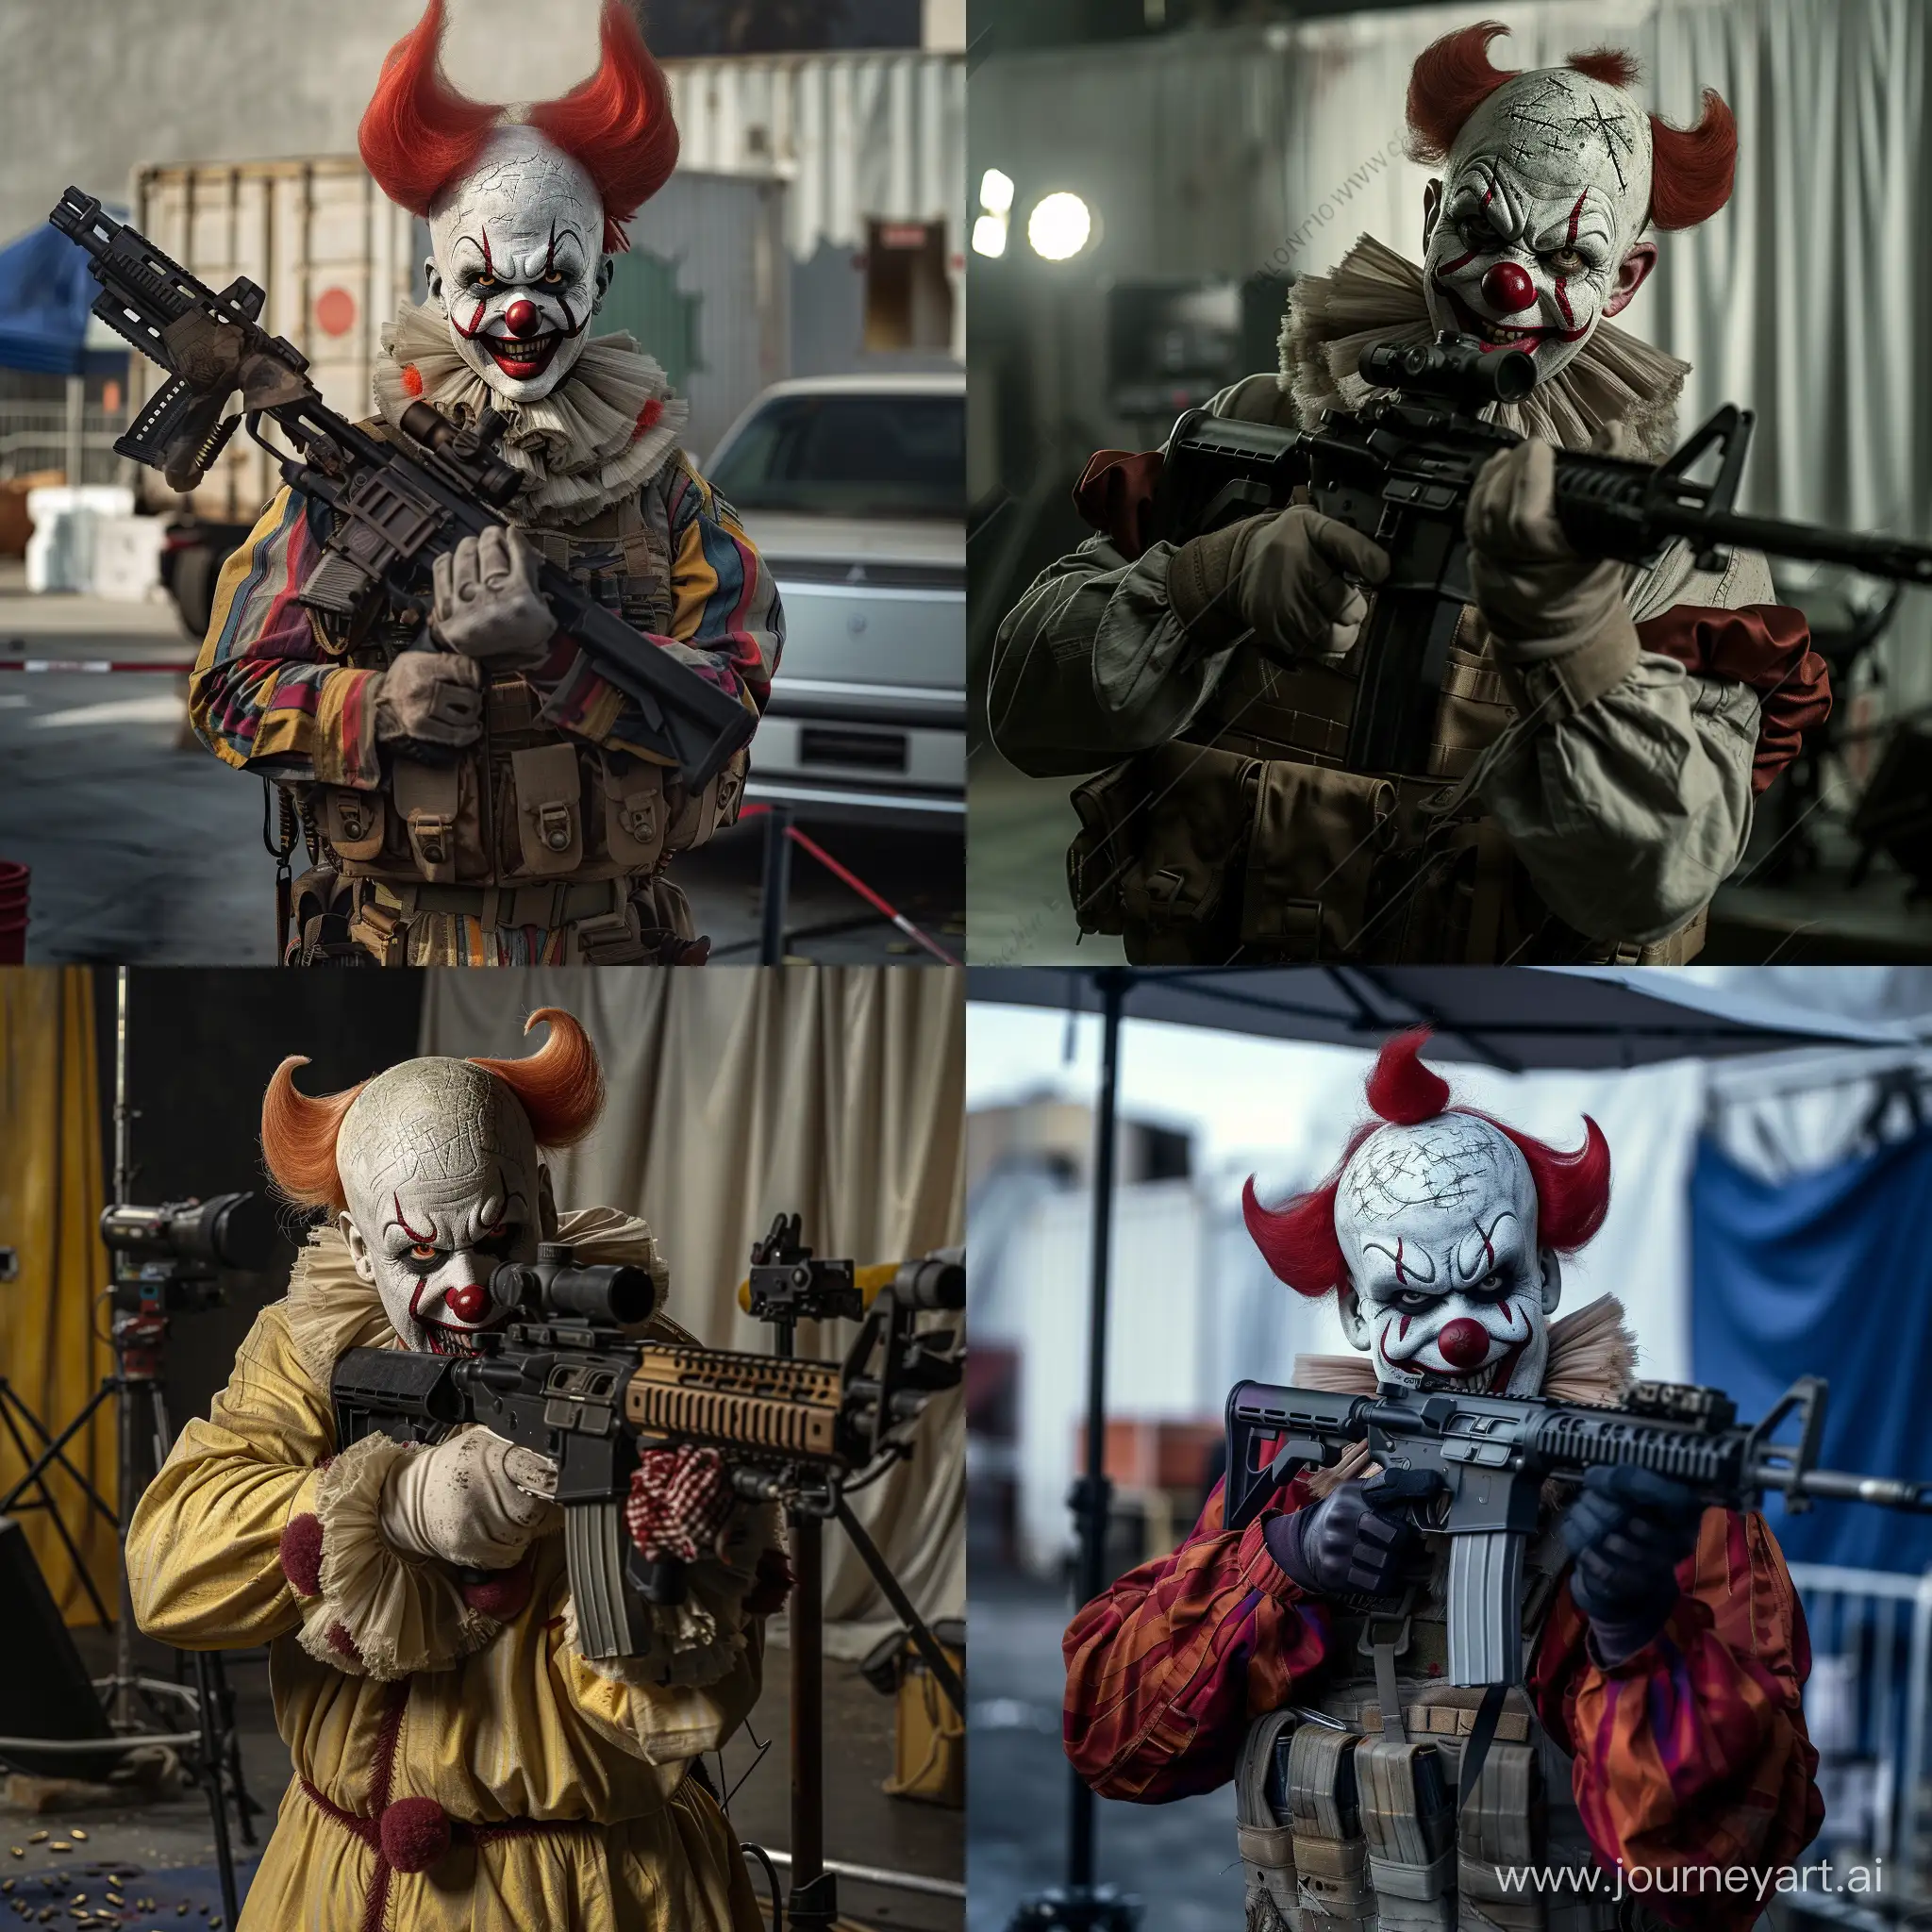 Sinister-Clown-with-Rifle-on-Hollywood-Film-Set